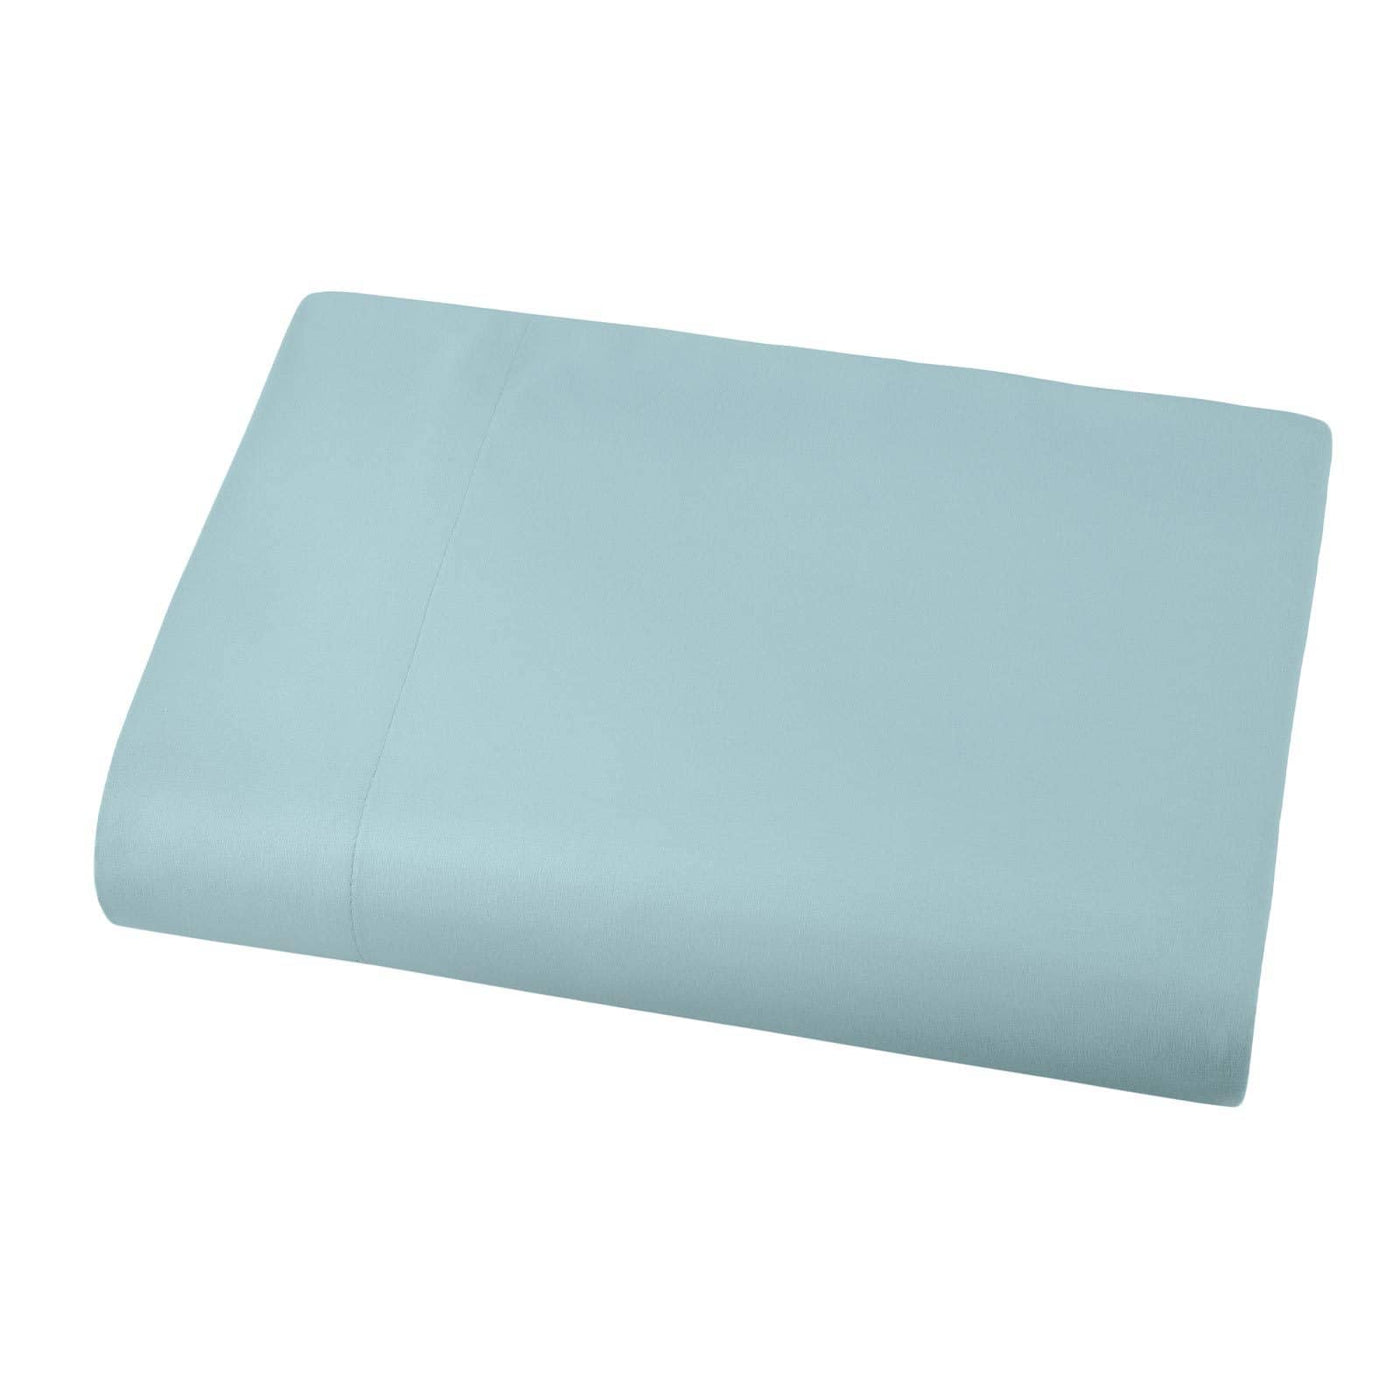 Soft and Luxurious Over-sized Flat Sheet 132 in x 110 in by Vilano springs in Sky Blue#color_vilano-sky-blue